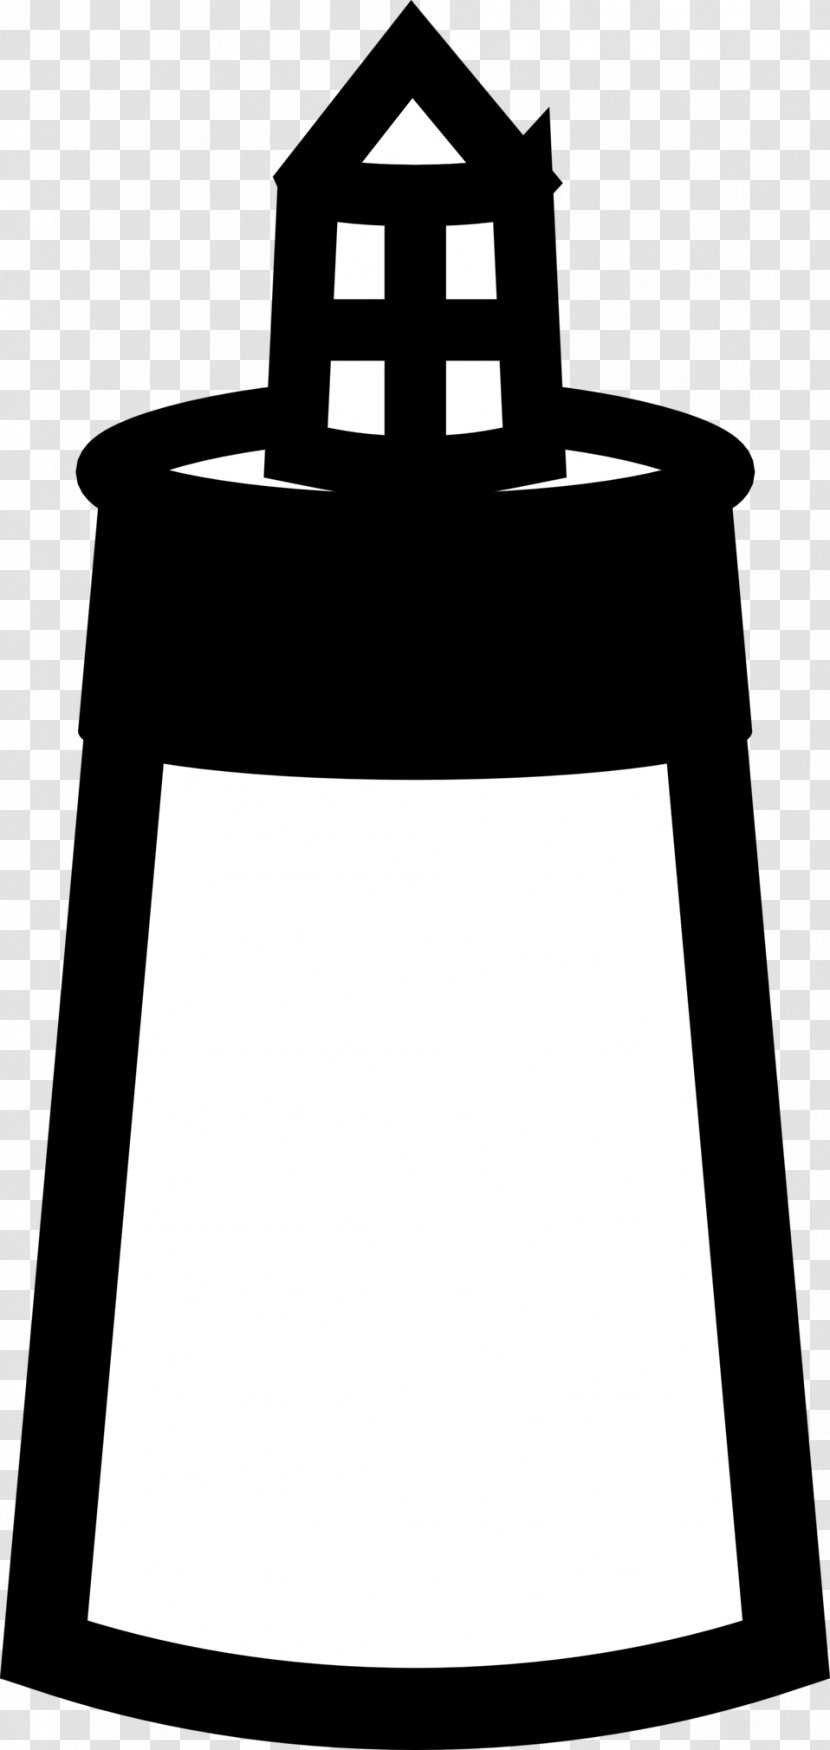 Lighthouse Pictogram Clip Art - Black And White Transparent PNG